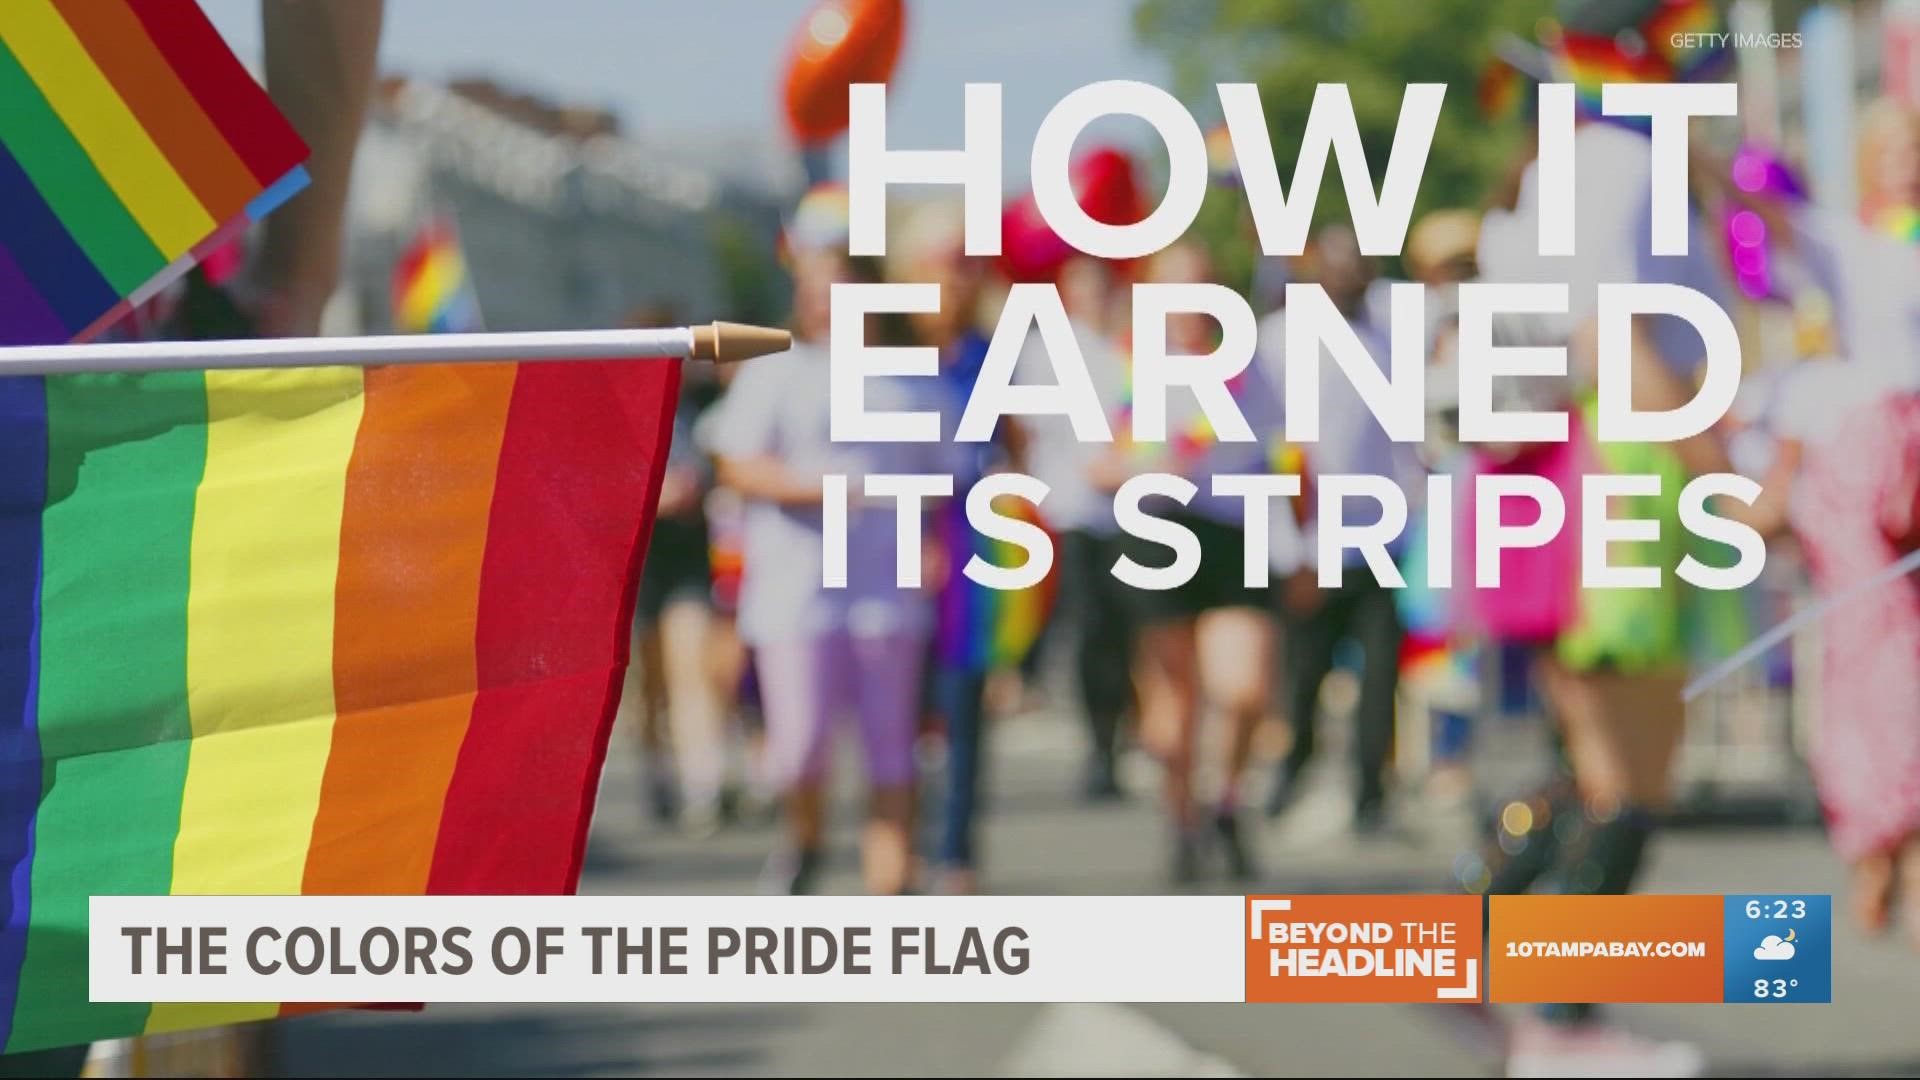 The Pride flag is a symbol of love and hope for millions of Americans.